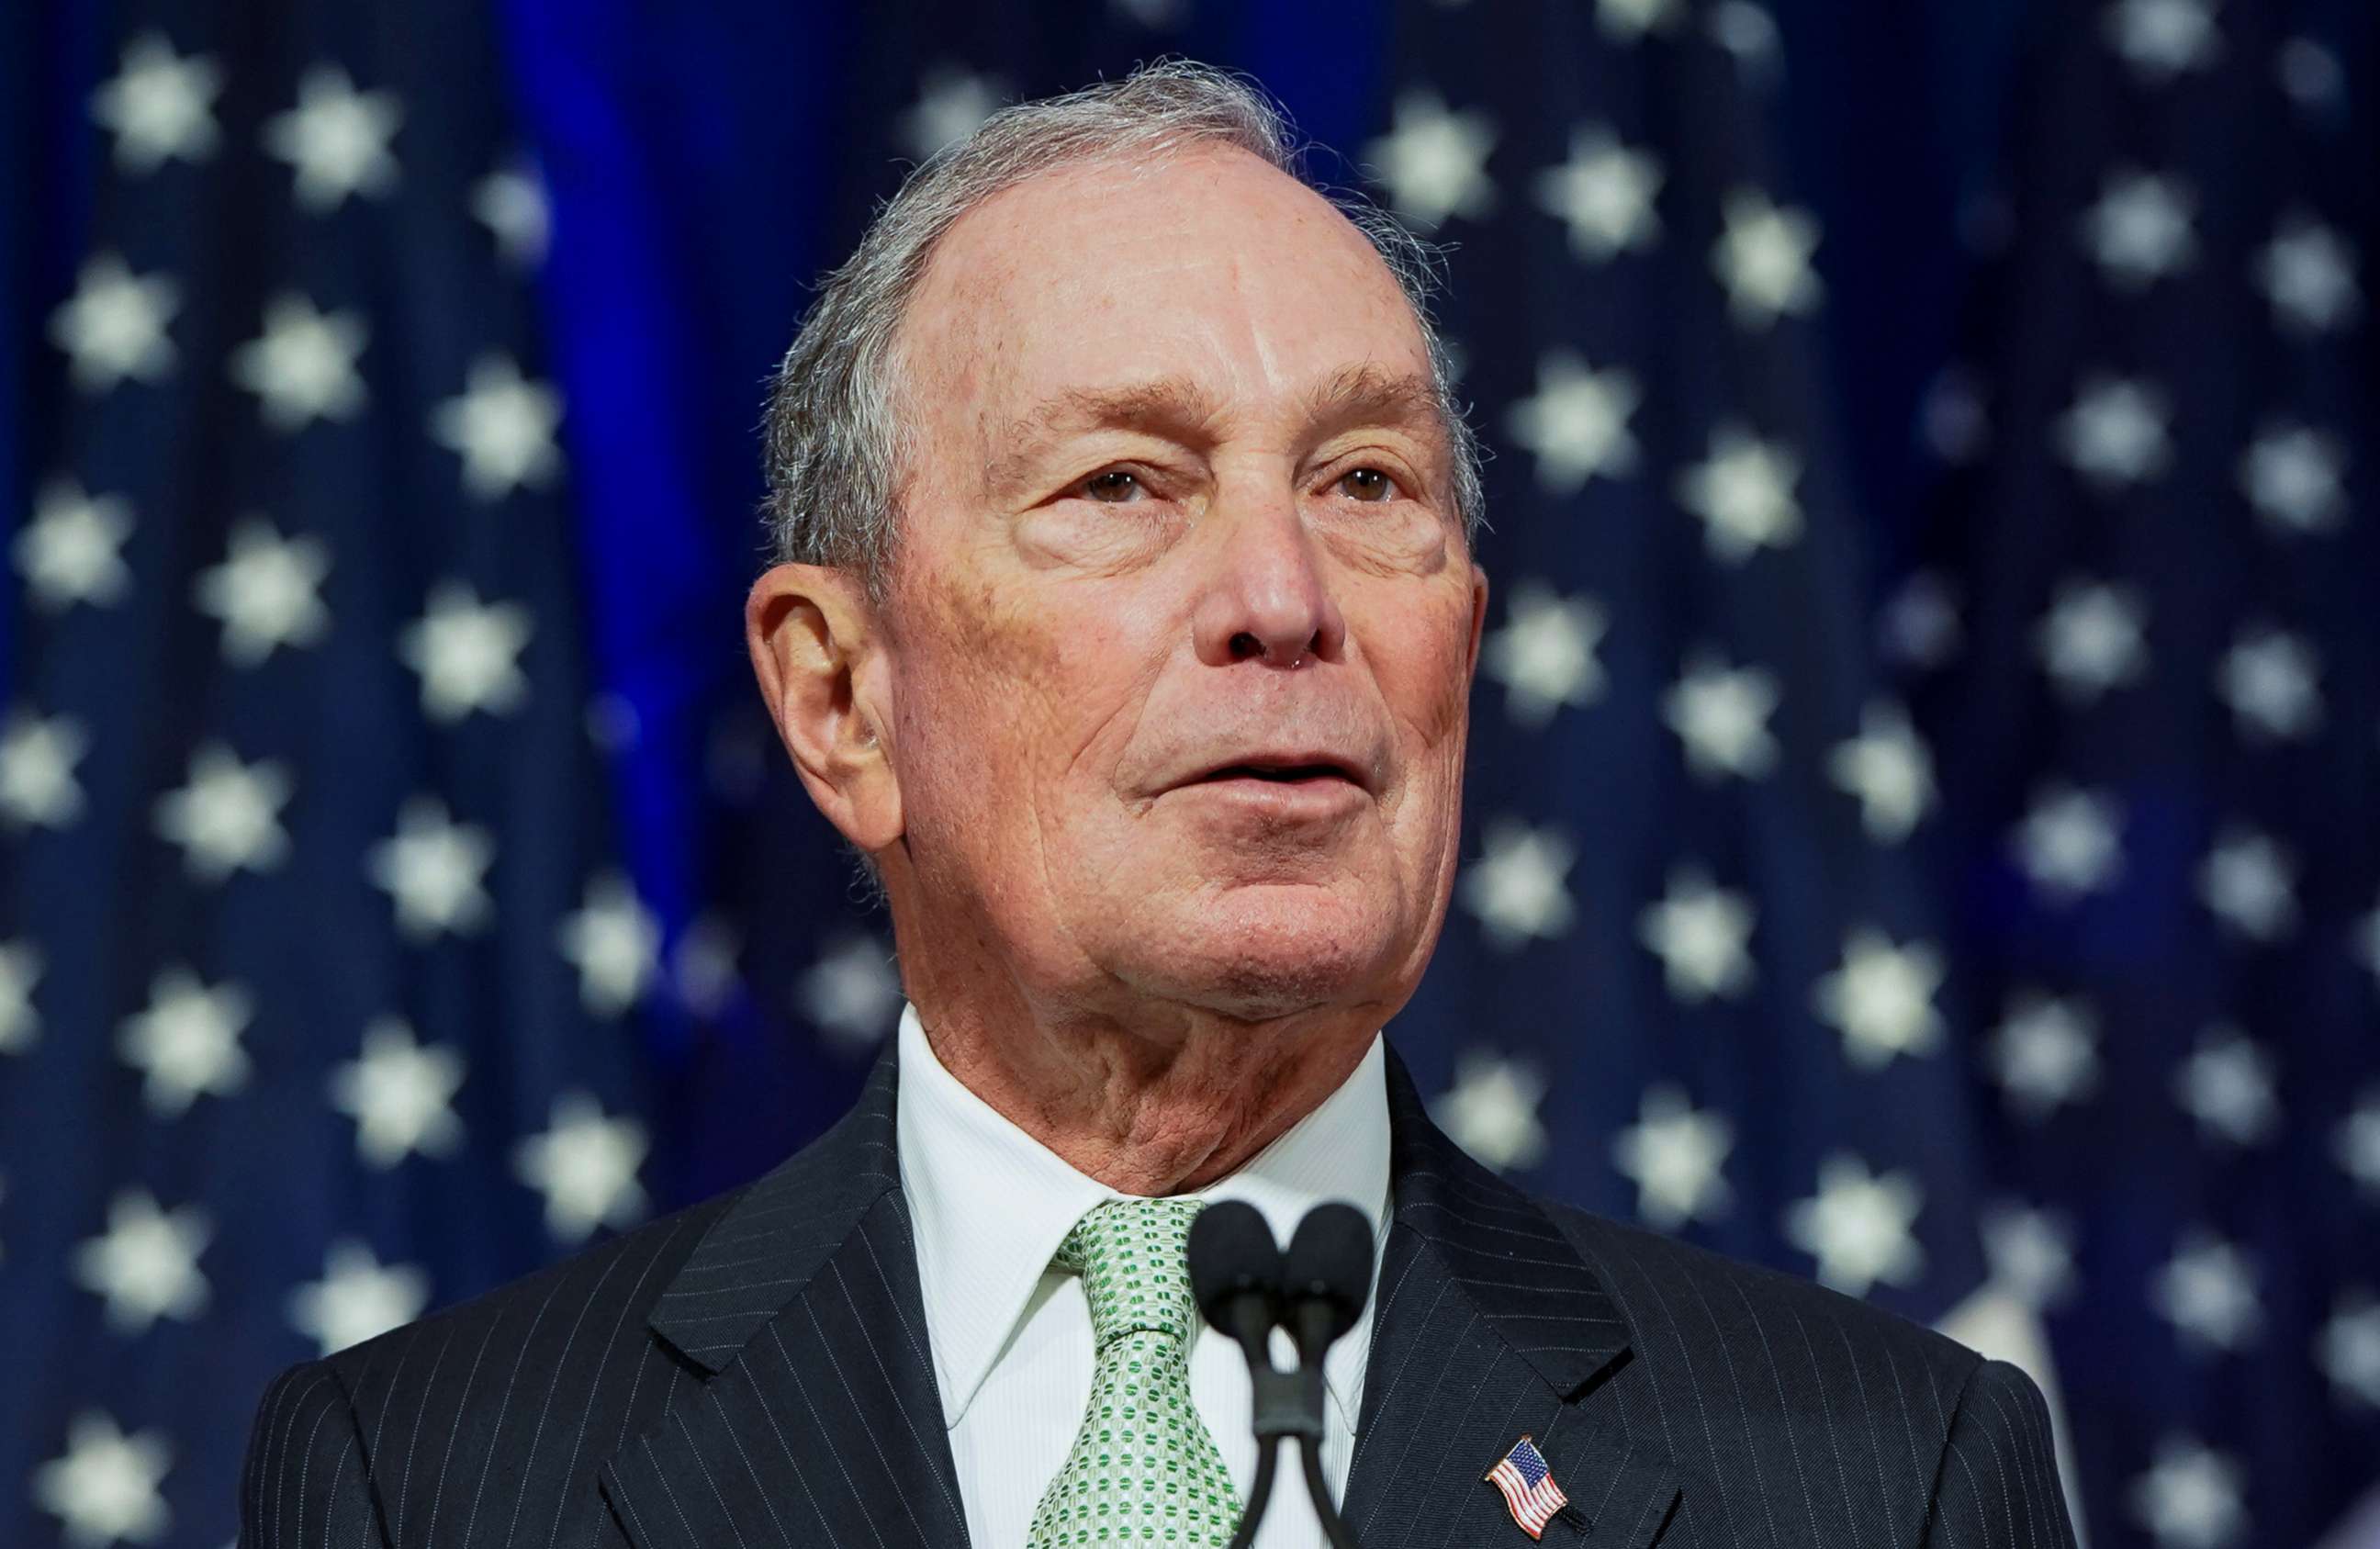 PHOTO: Billionaire Michael Bloomberg addresses a news conference after launching his presidential bid in Norfolk, Va., Nov. 25, 2019.